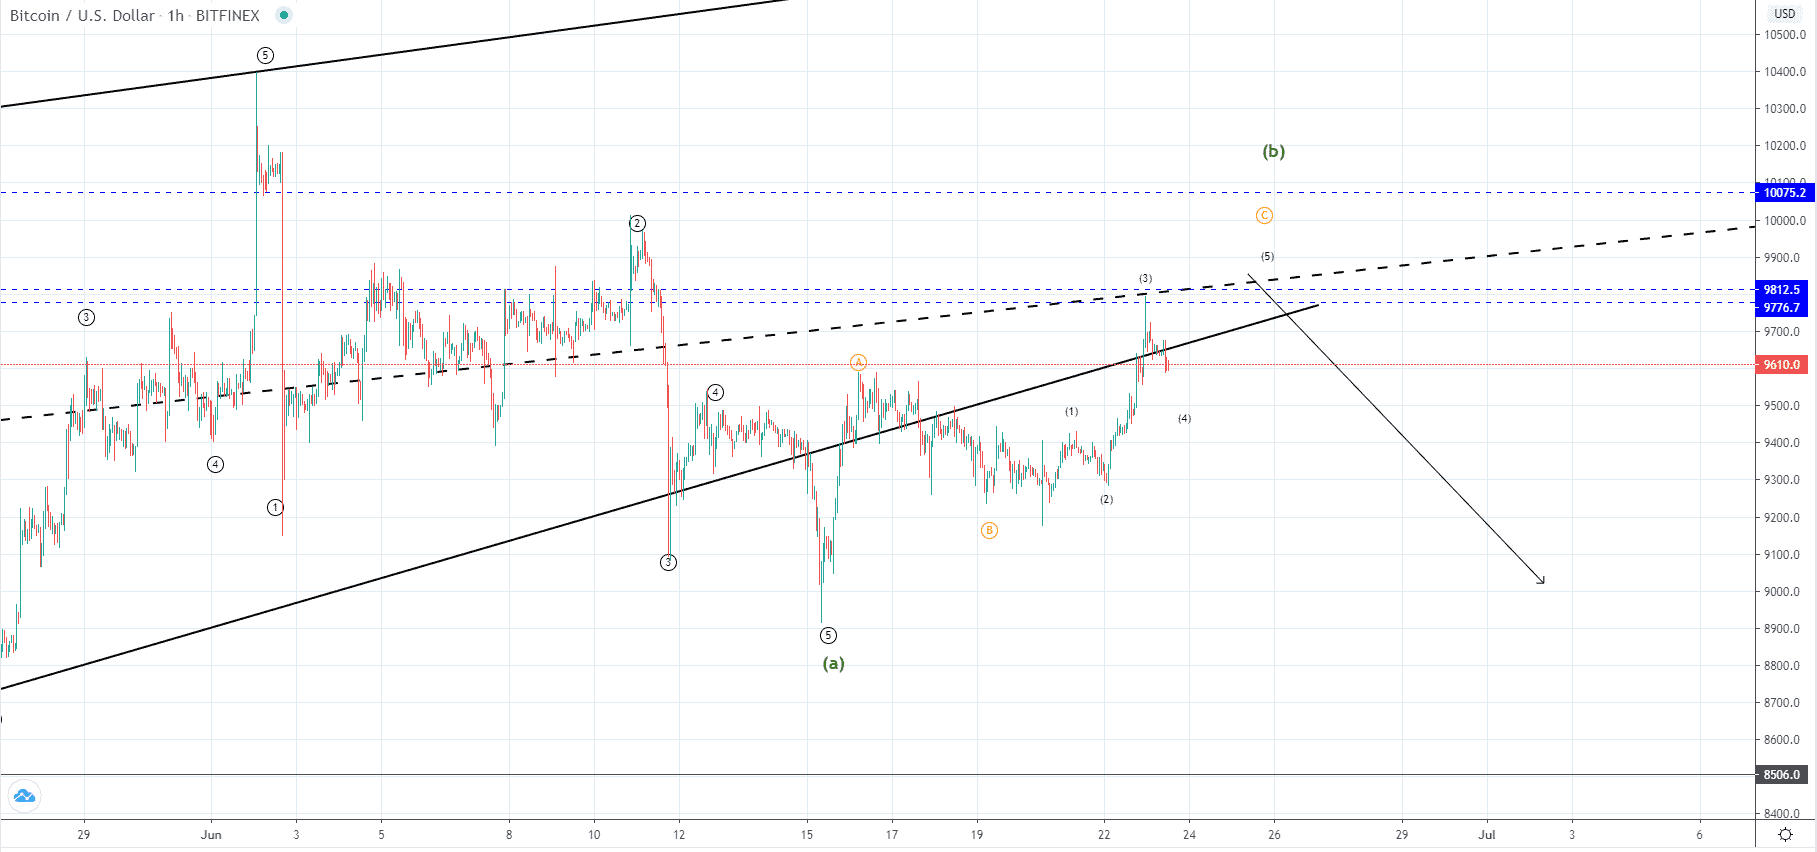 BTC and XRP – Bullish price action seen but it looks corrective